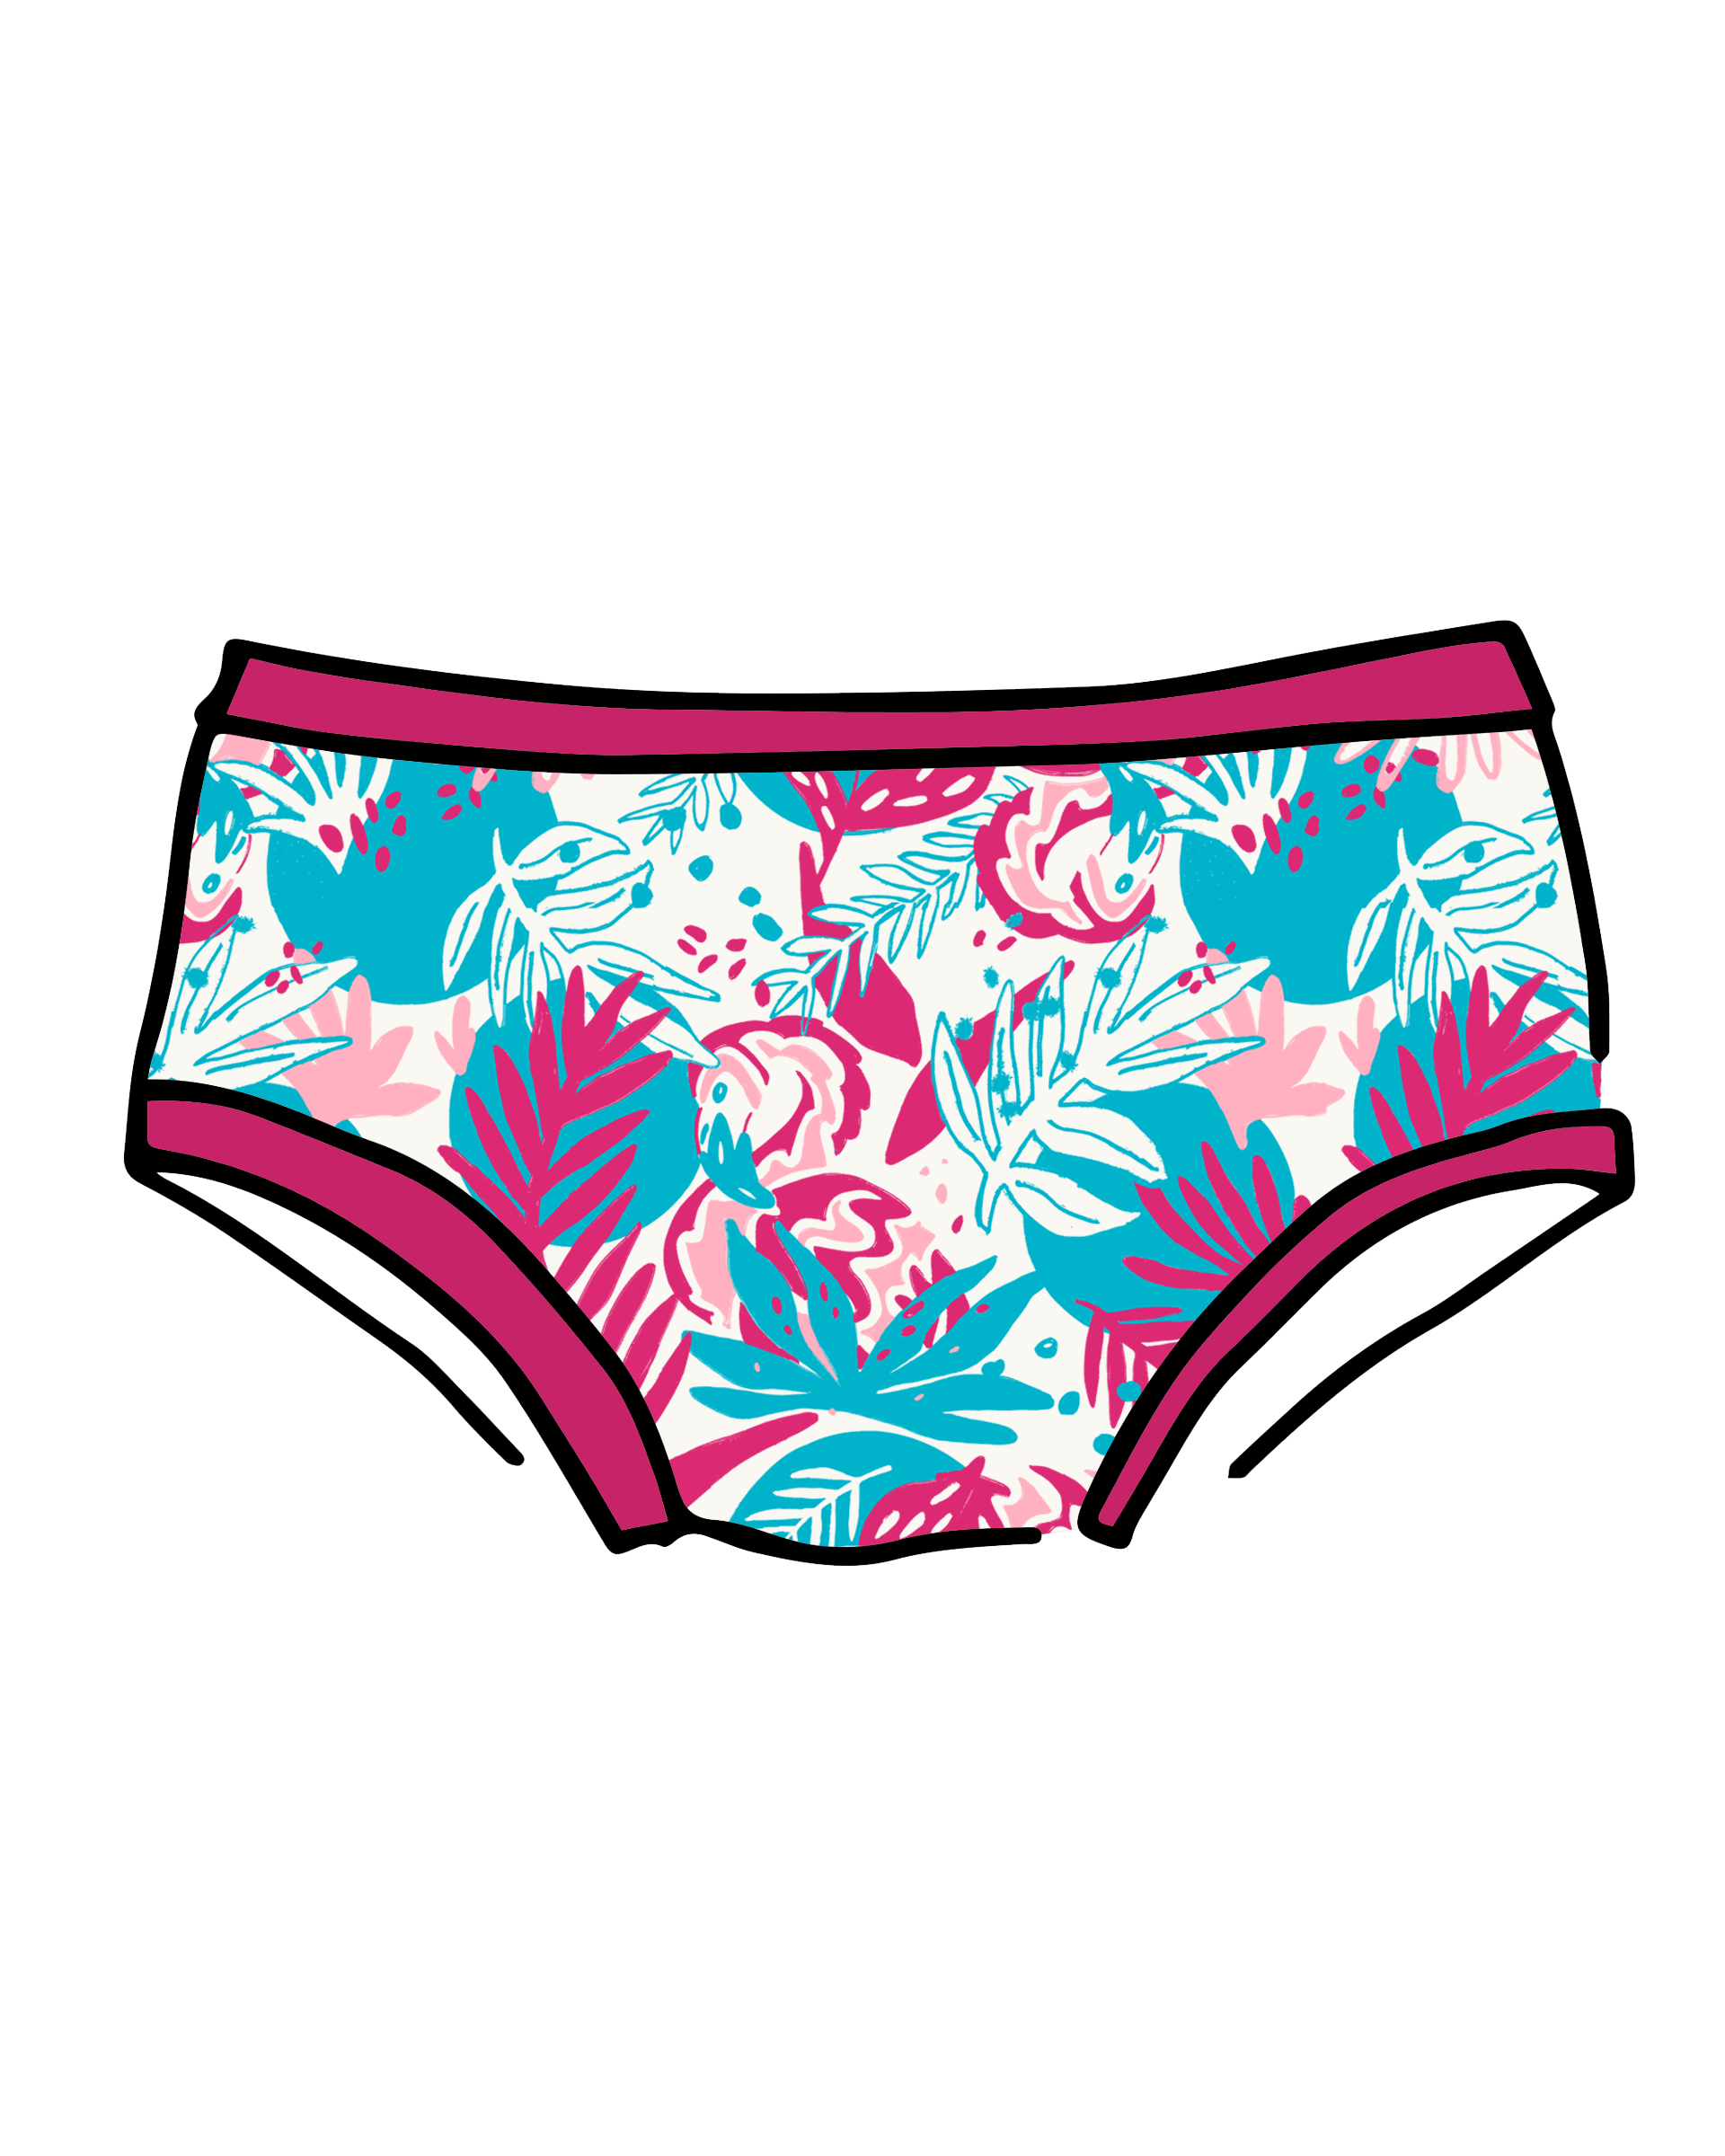 Drawing of Thunderpants Hipster style underwear in Finding Flamingo.